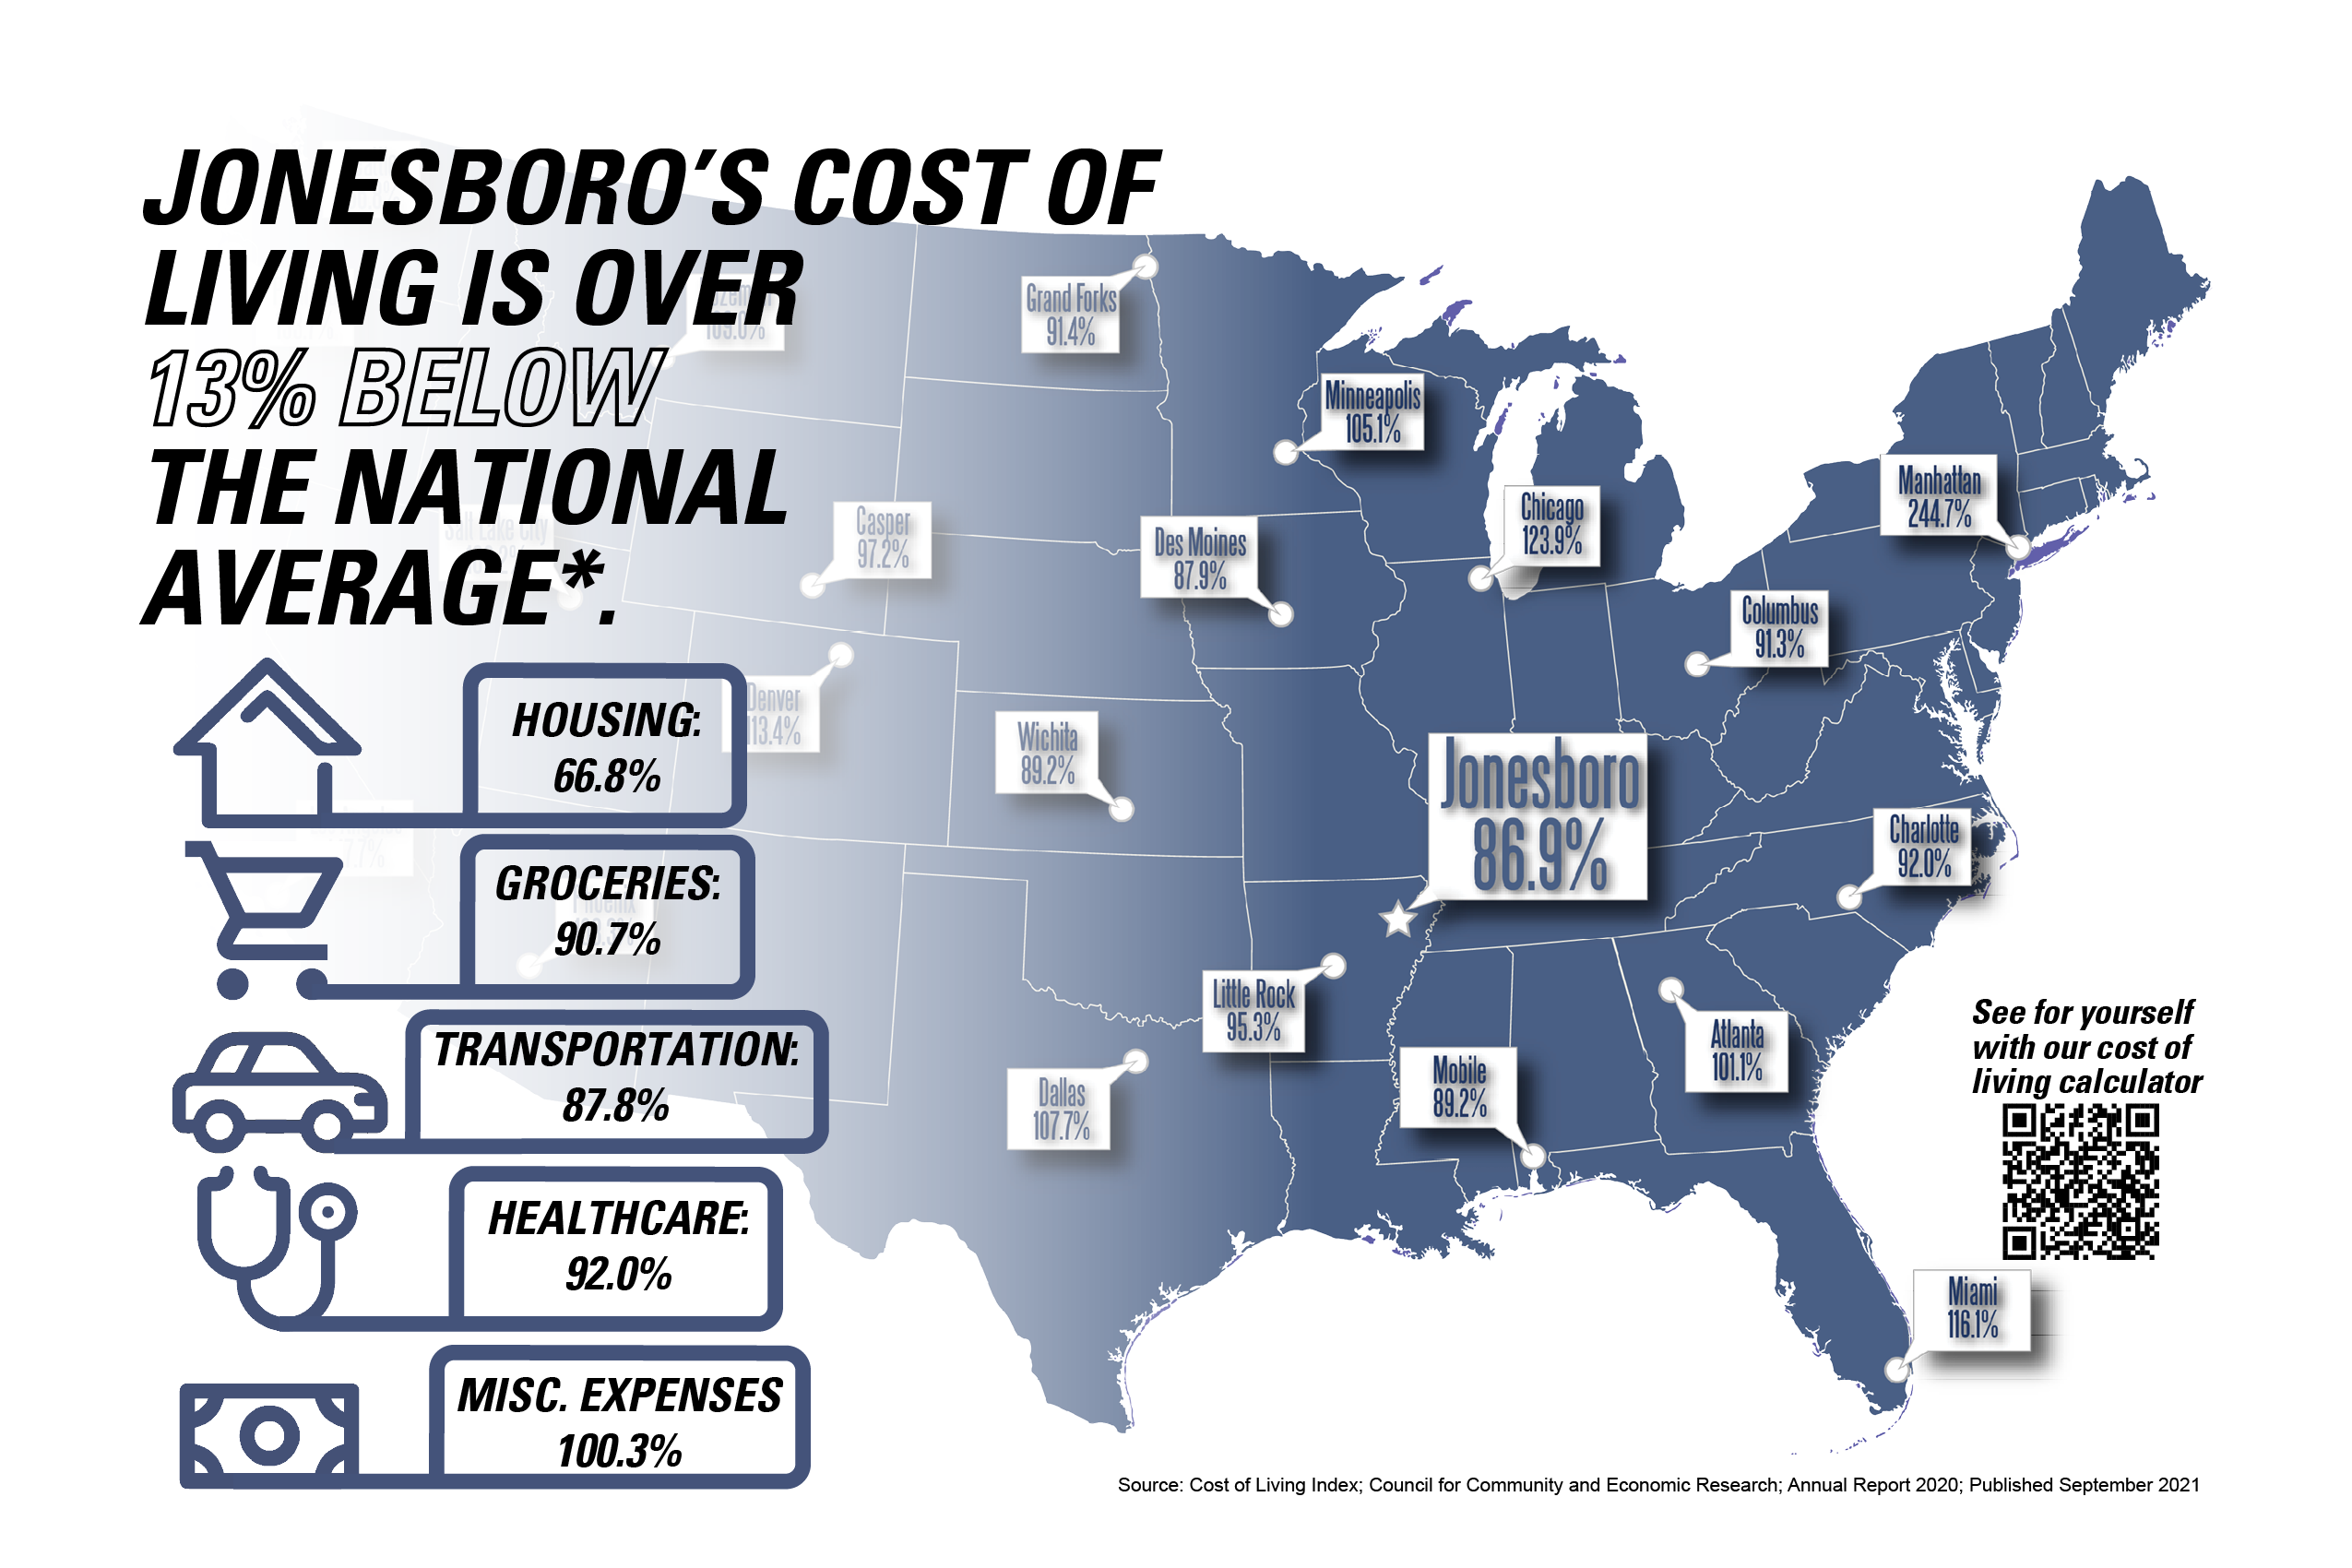 Jonesboro's Cost of Living is Among the Lowest in the Country